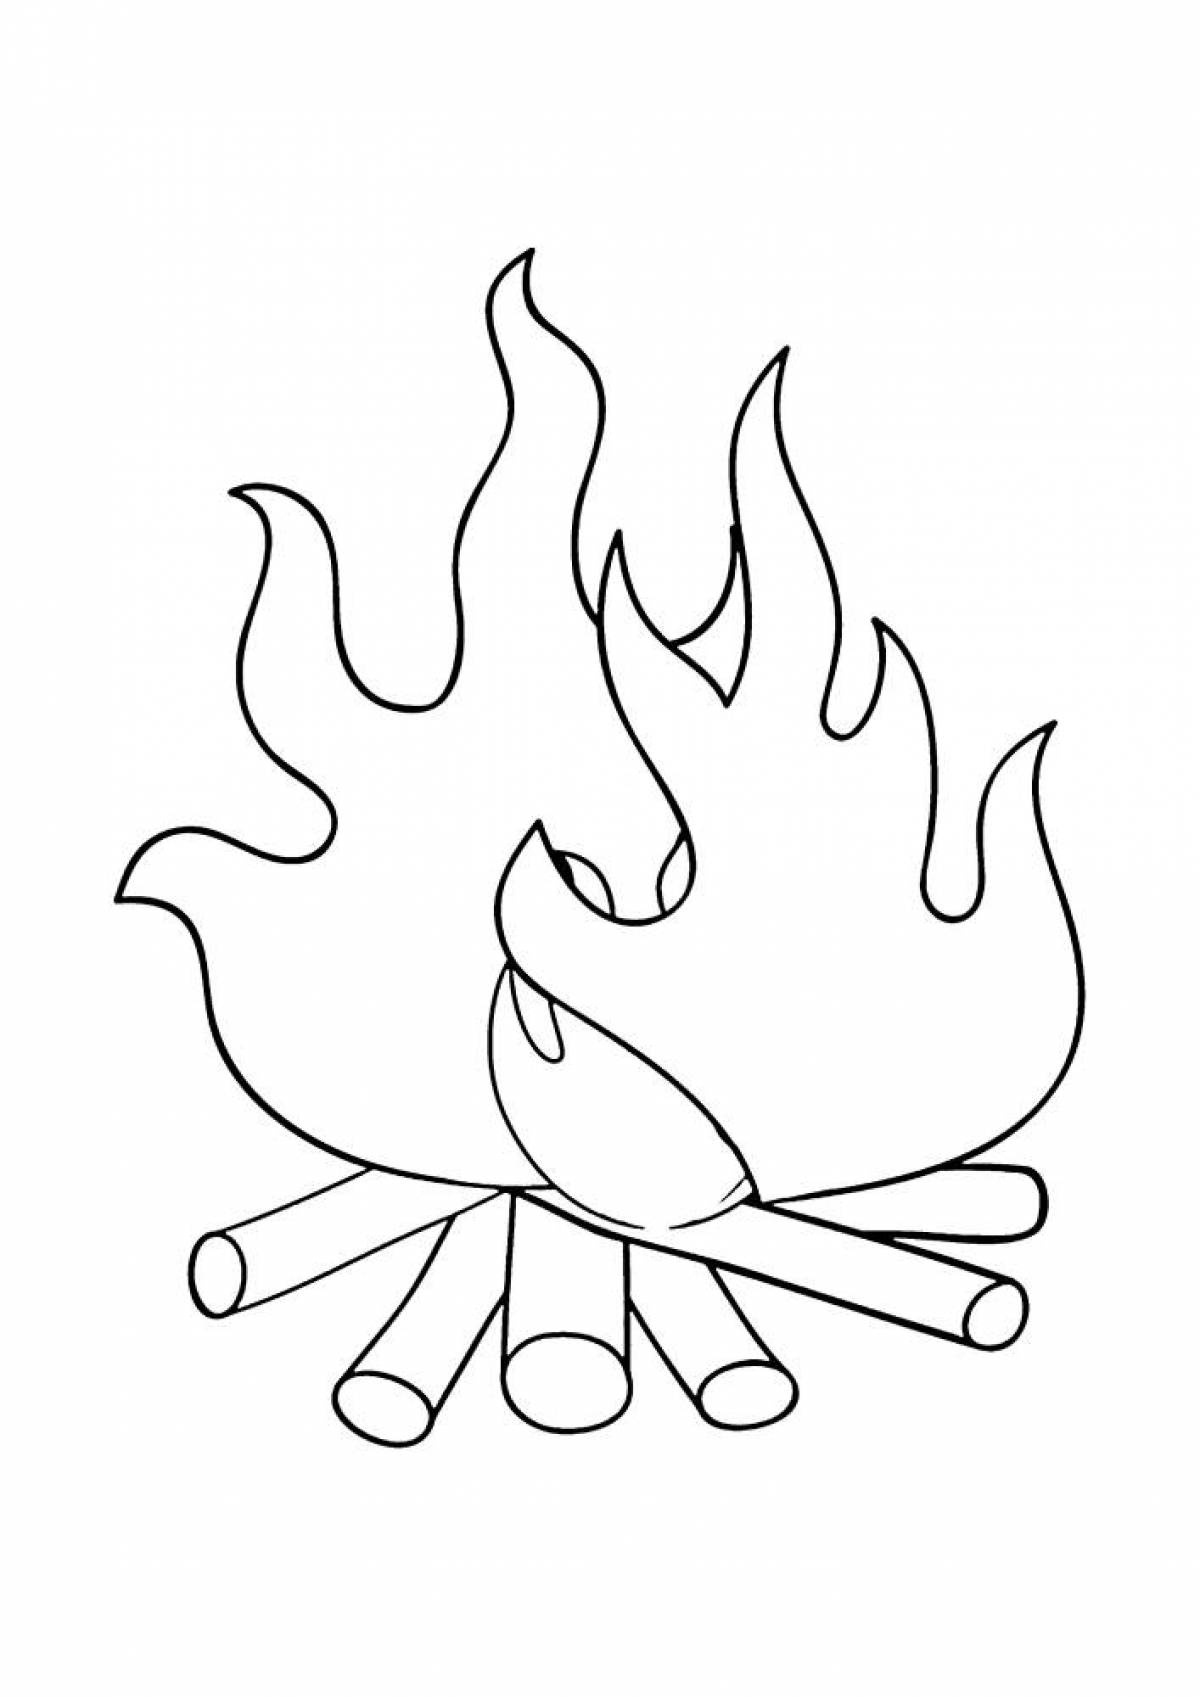 Attractive fire coloring for kids